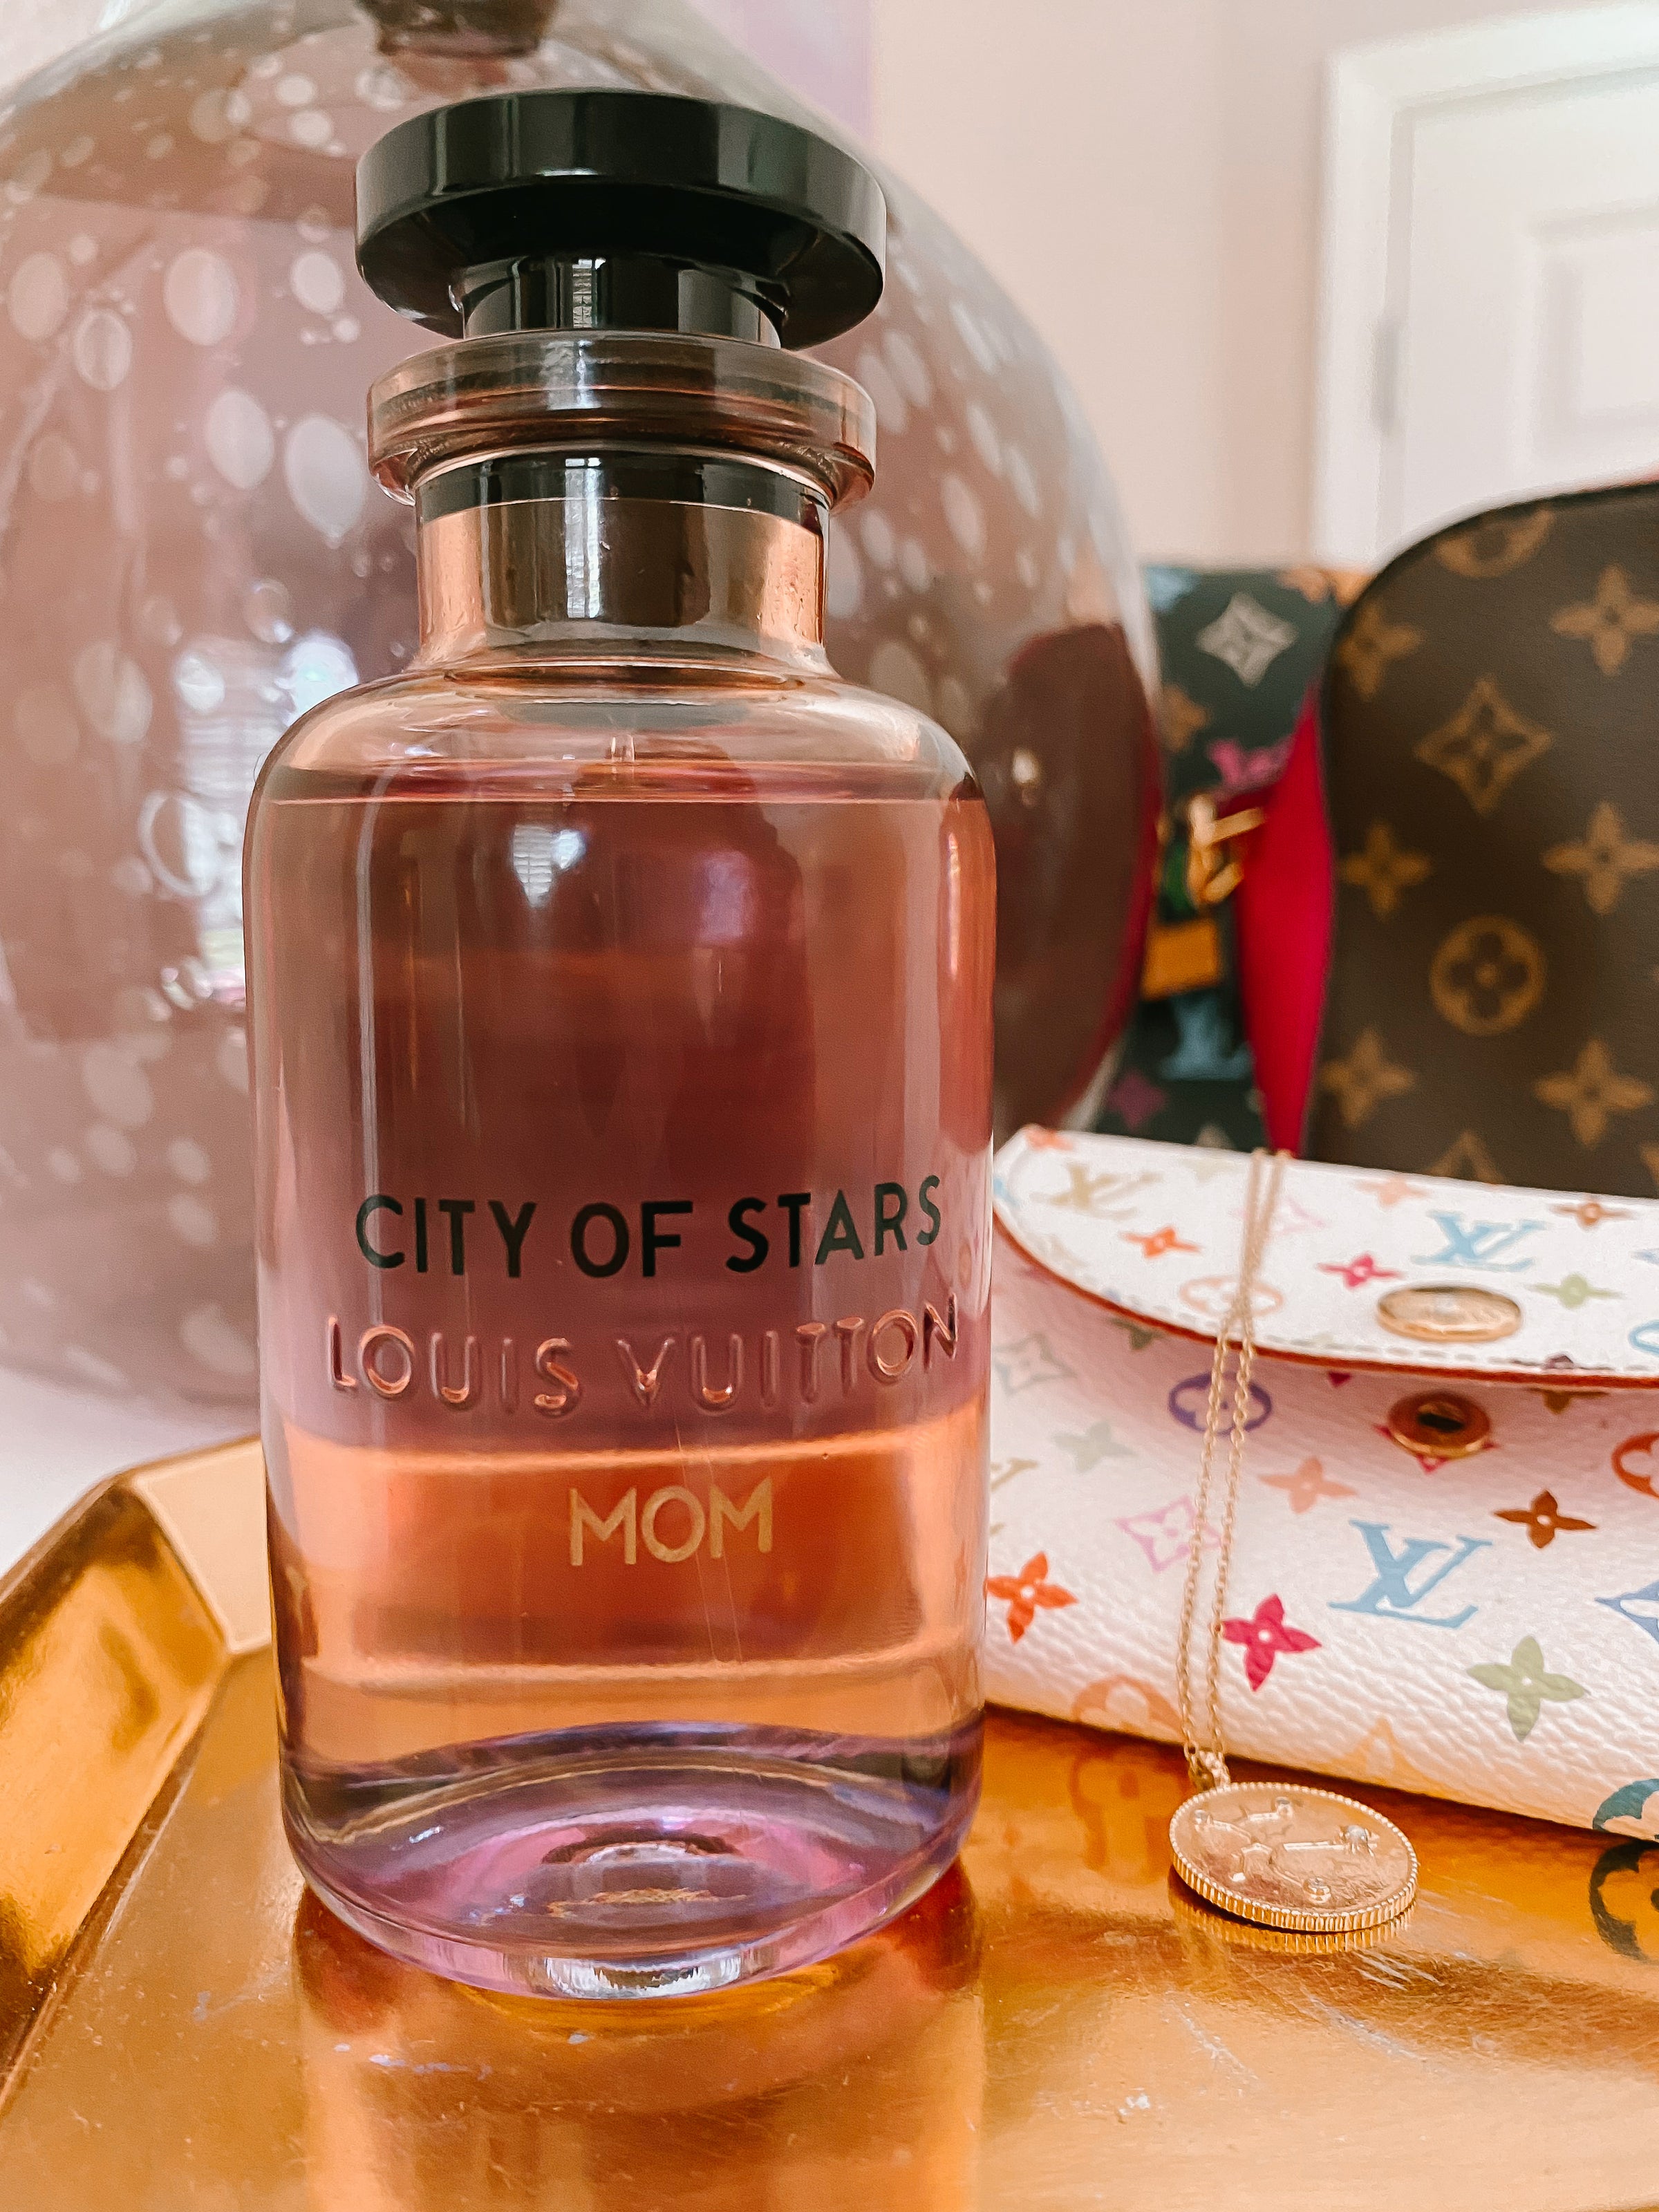 LOUIS VUITTON CITY OF STARS REVIEW 